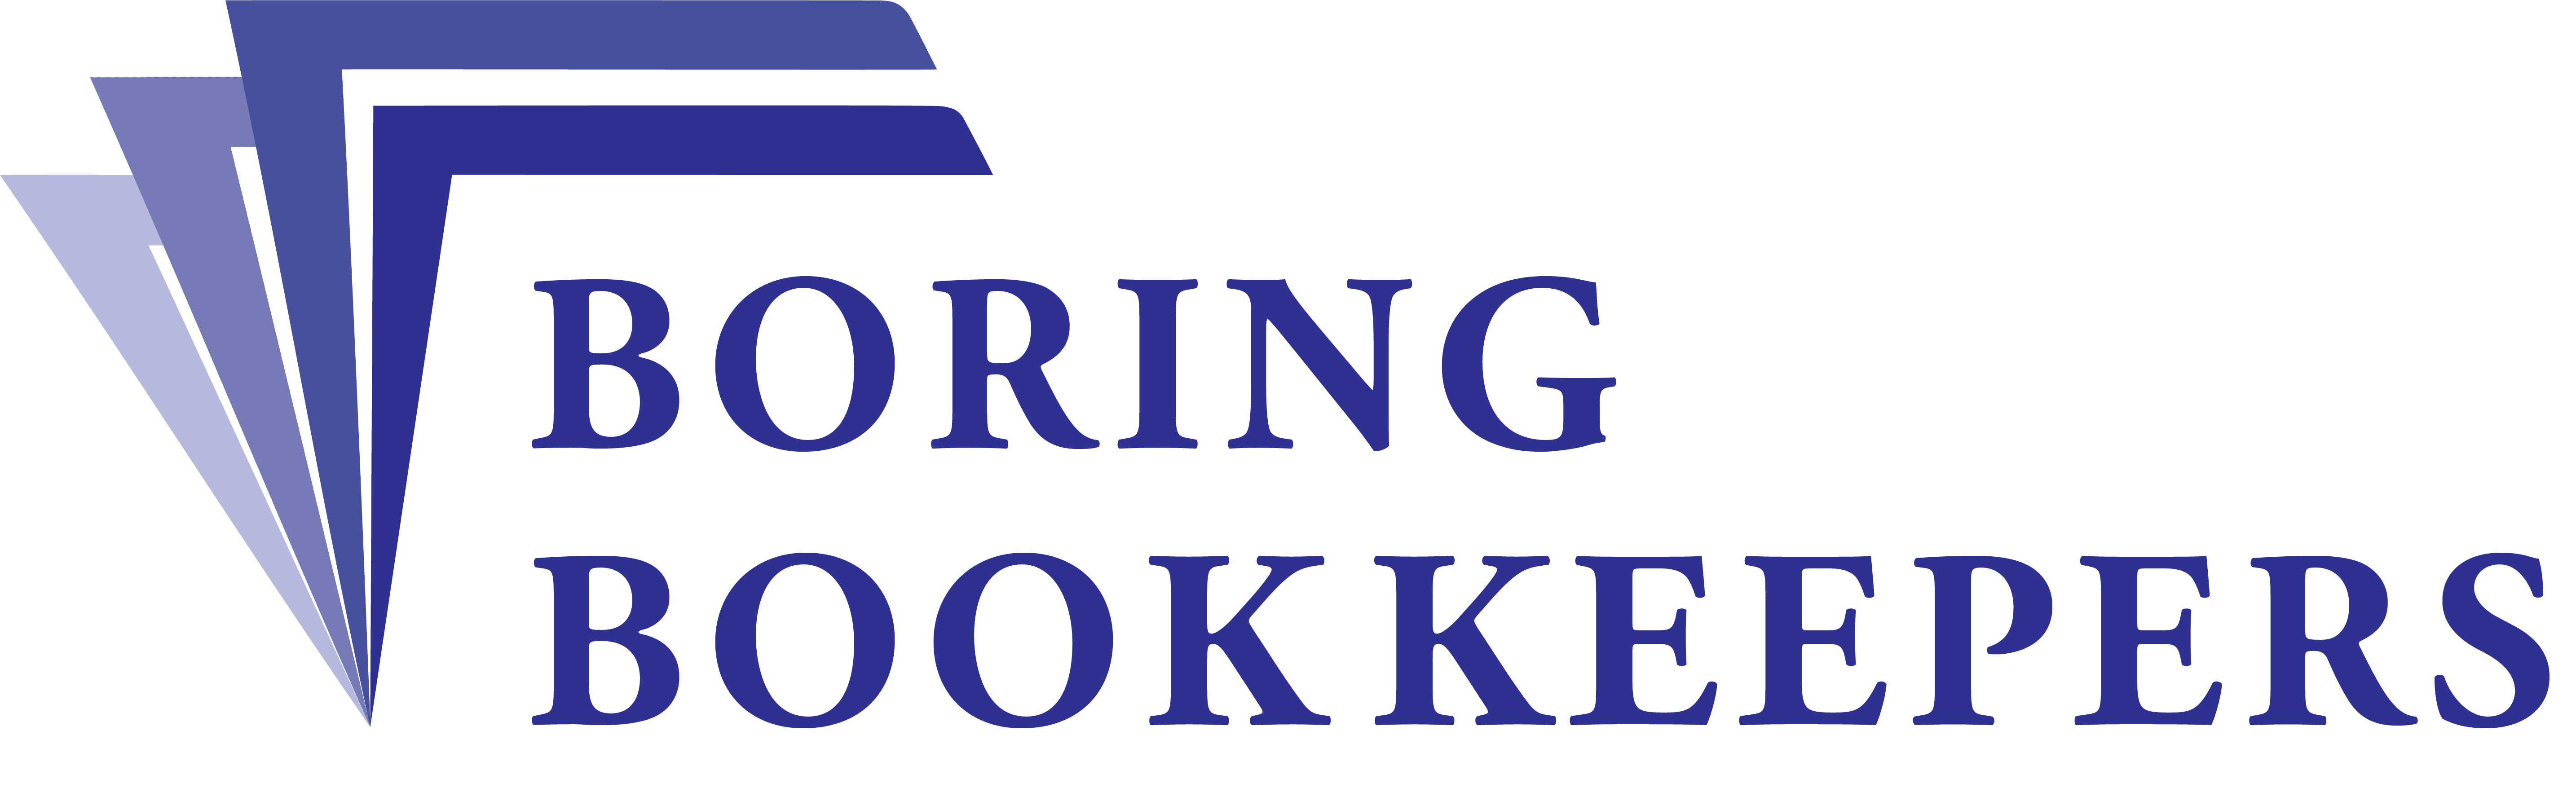 Boring Bookkeepers